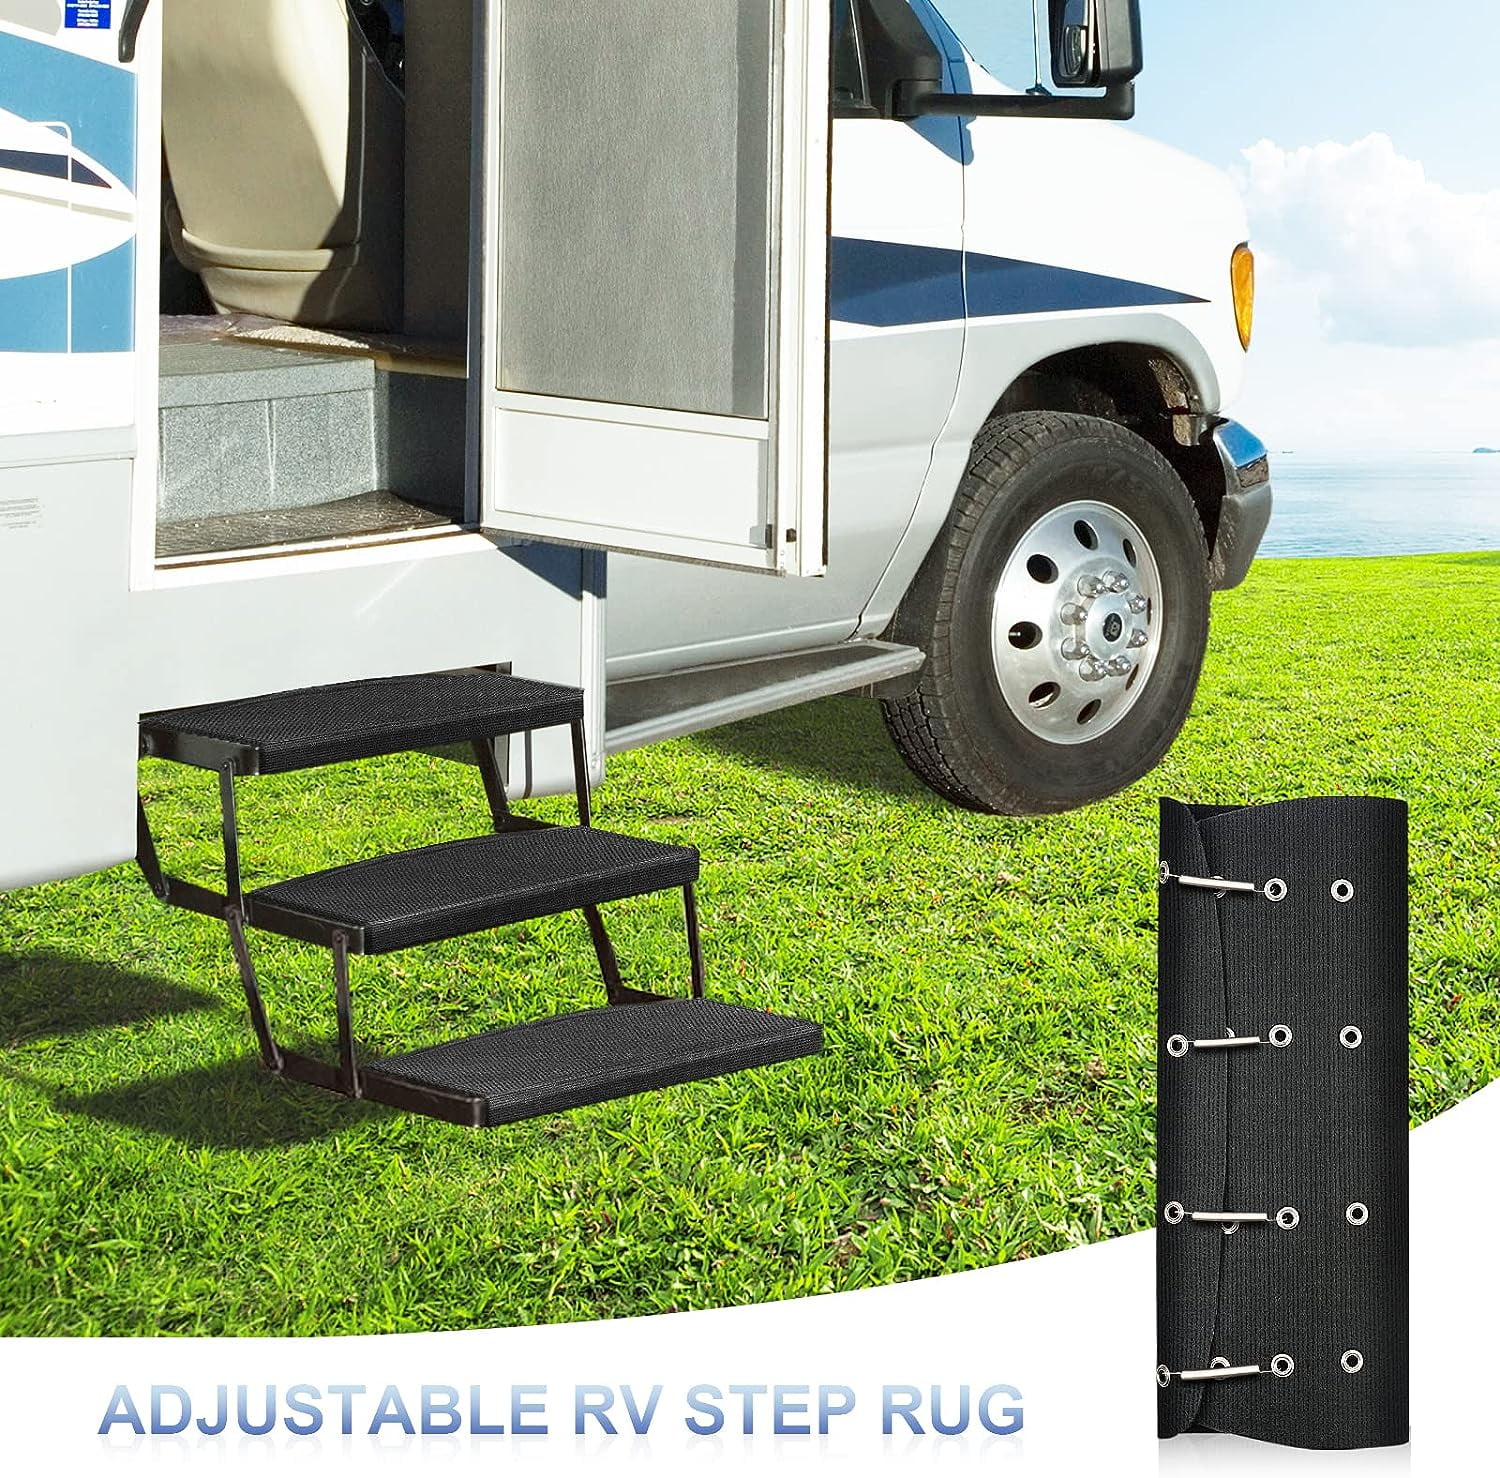 RV Step Covers Add Style and Safety